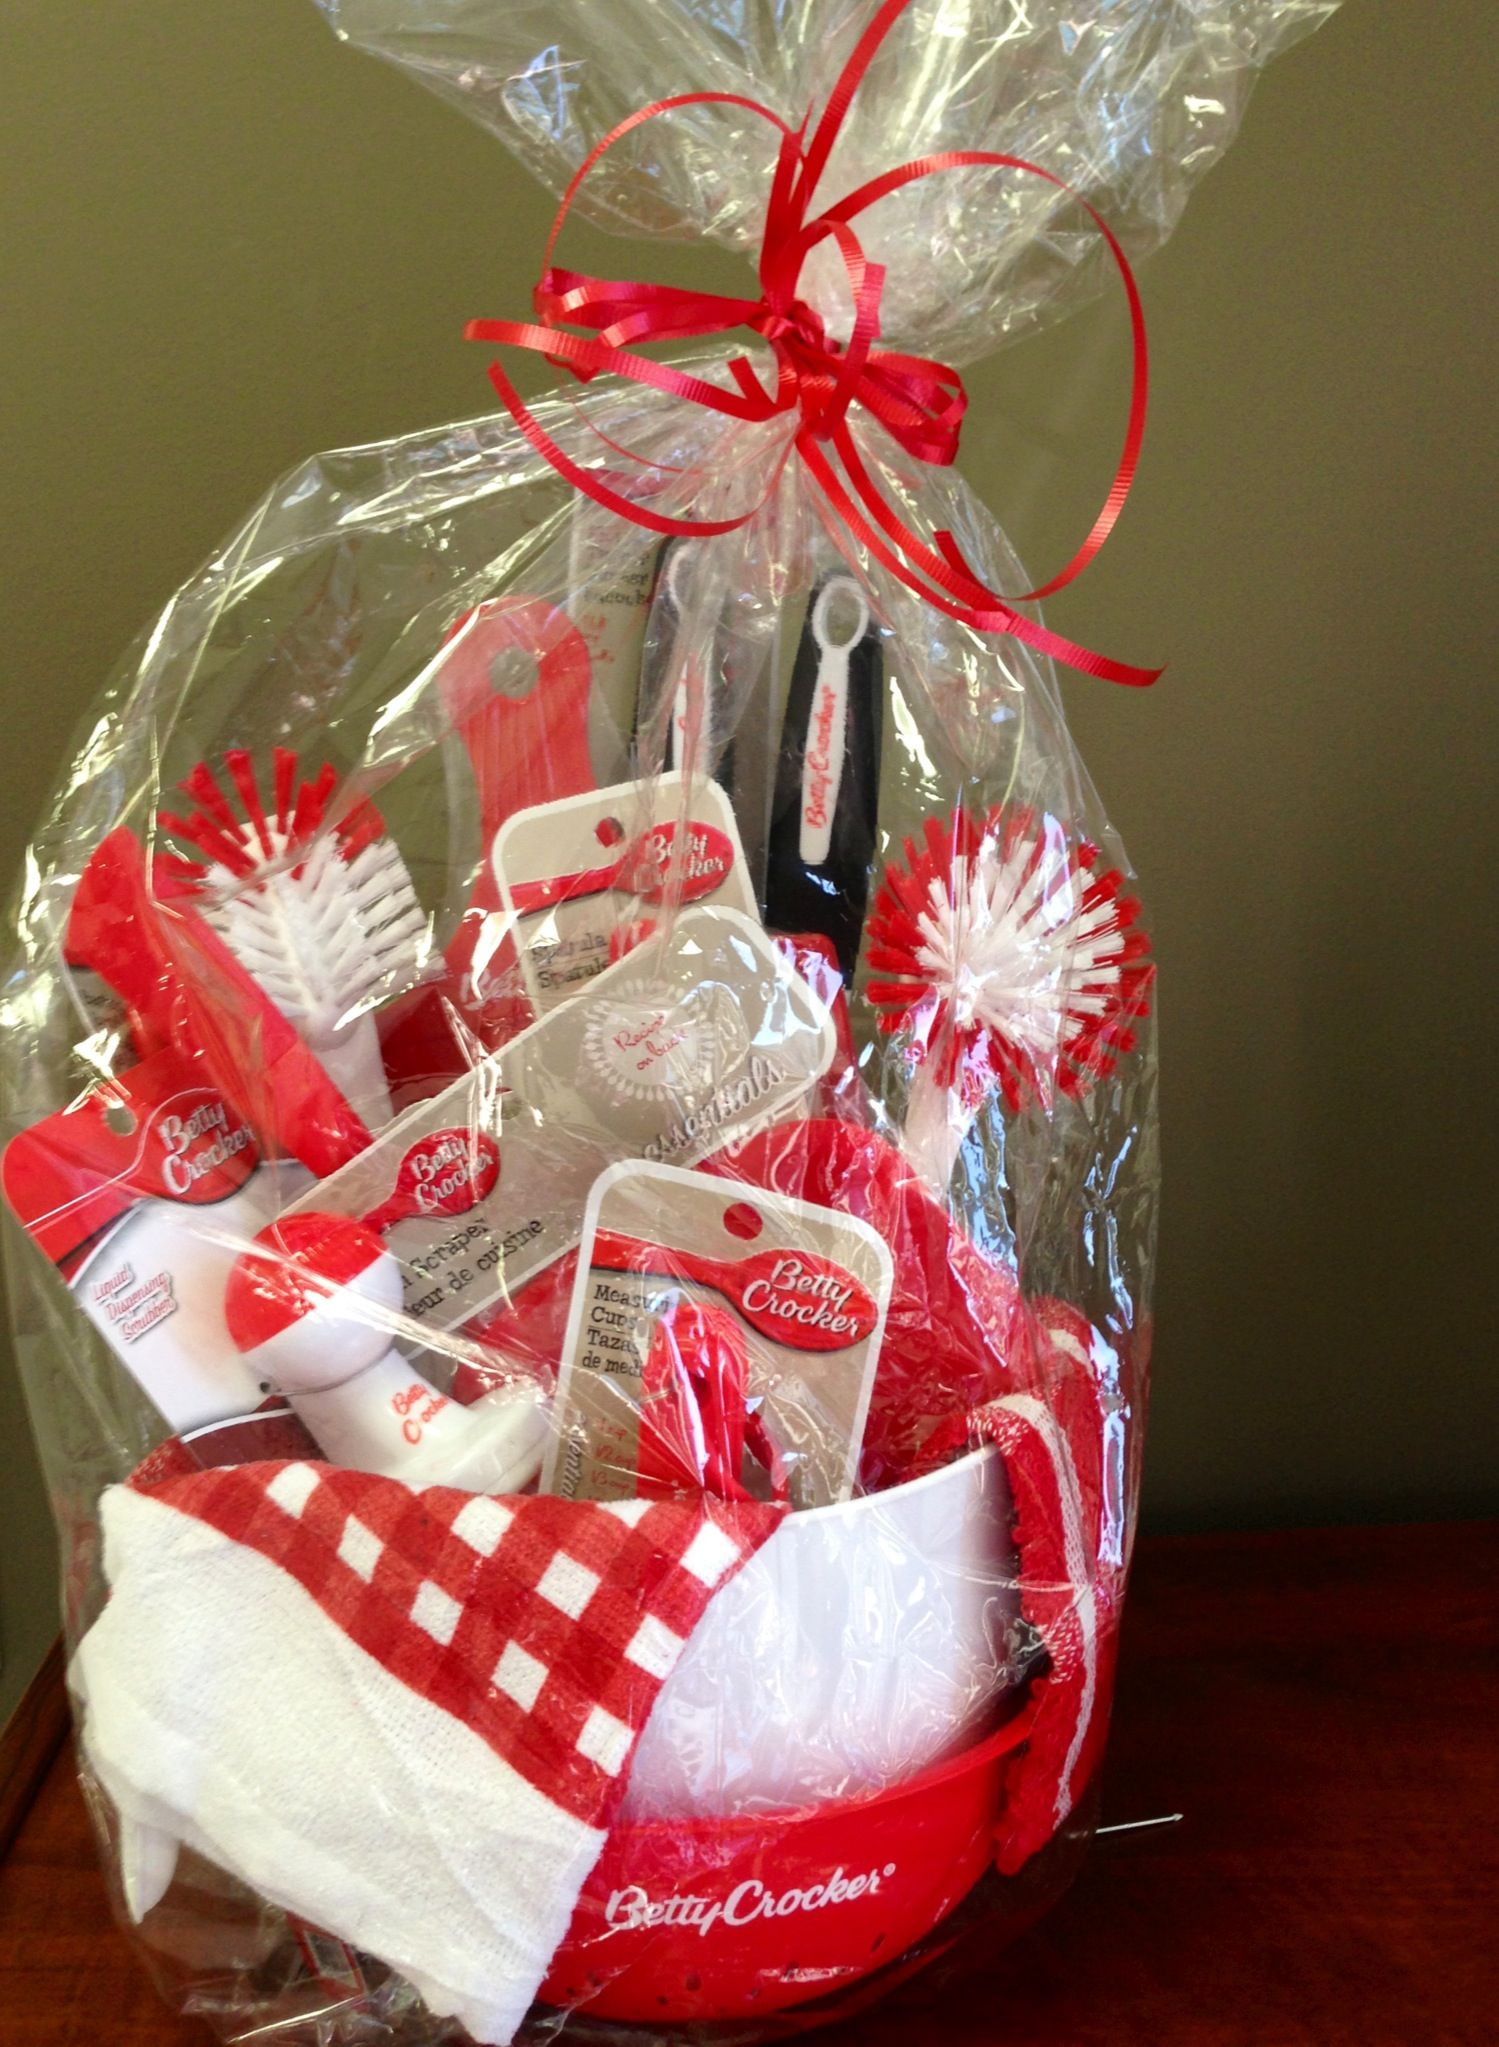 Ideas Gift Baskets Pizza Pans
 Kitchen Gift basket from the Dollar Tree Good for showers